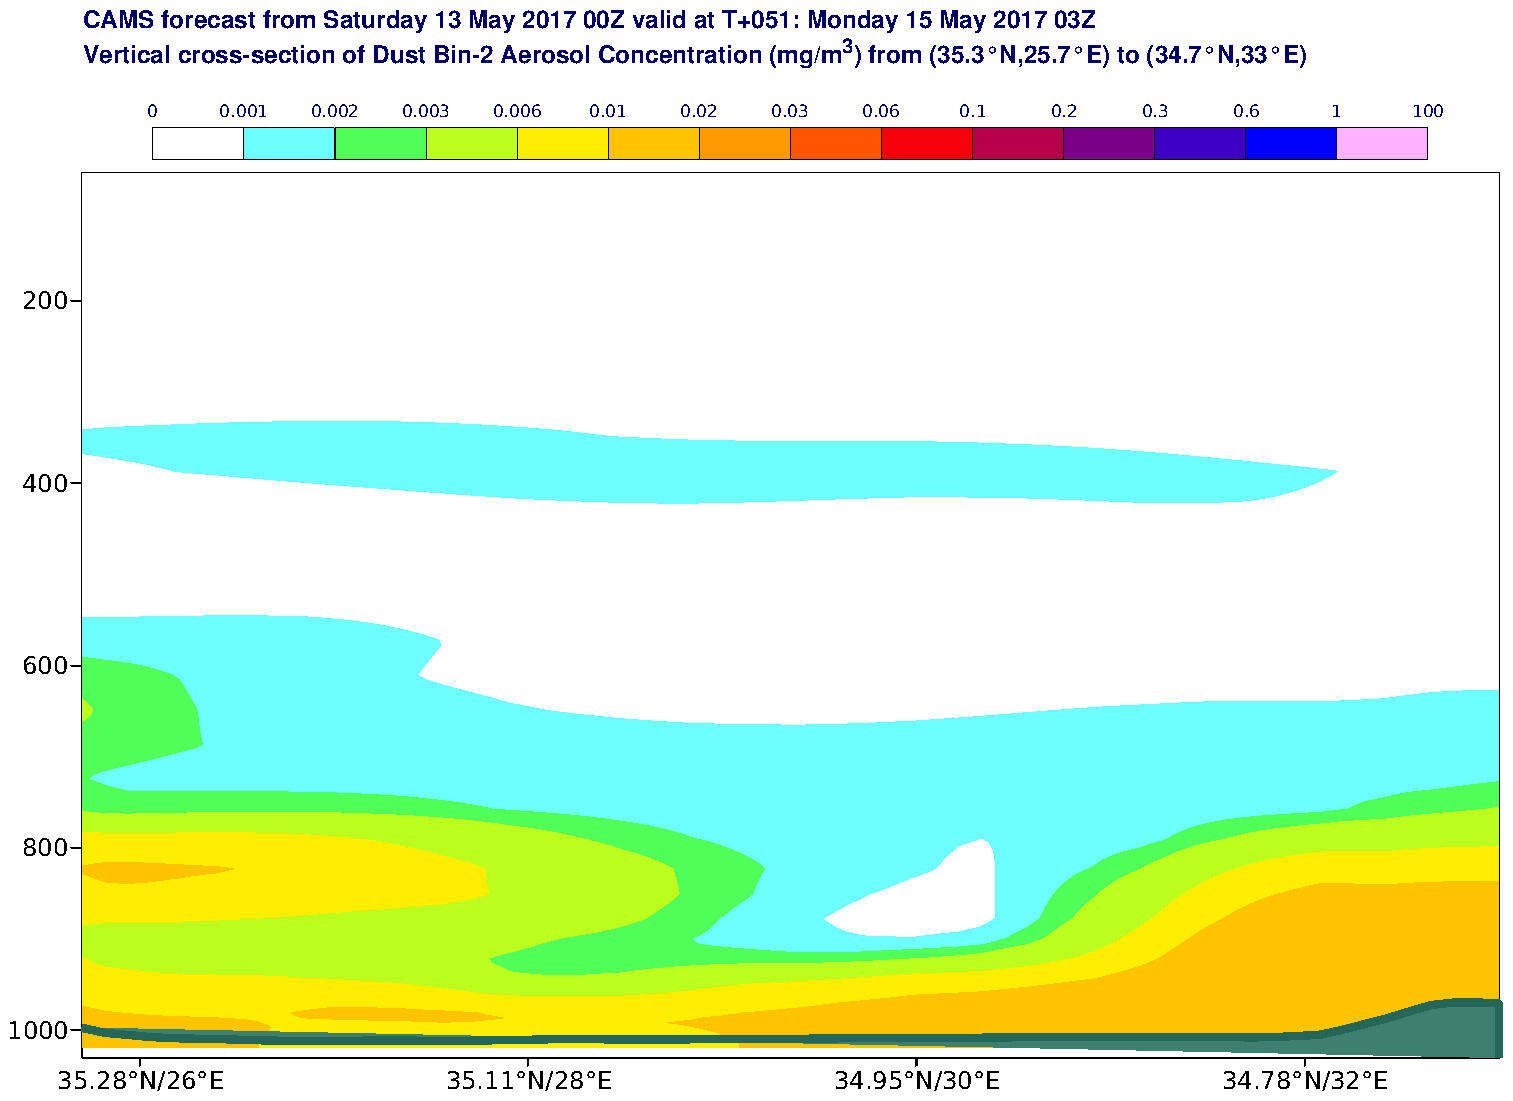 Vertical cross-section of Dust Bin-2 Aerosol Concentration (mg/m3) valid at T51 - 2017-05-15 03:00